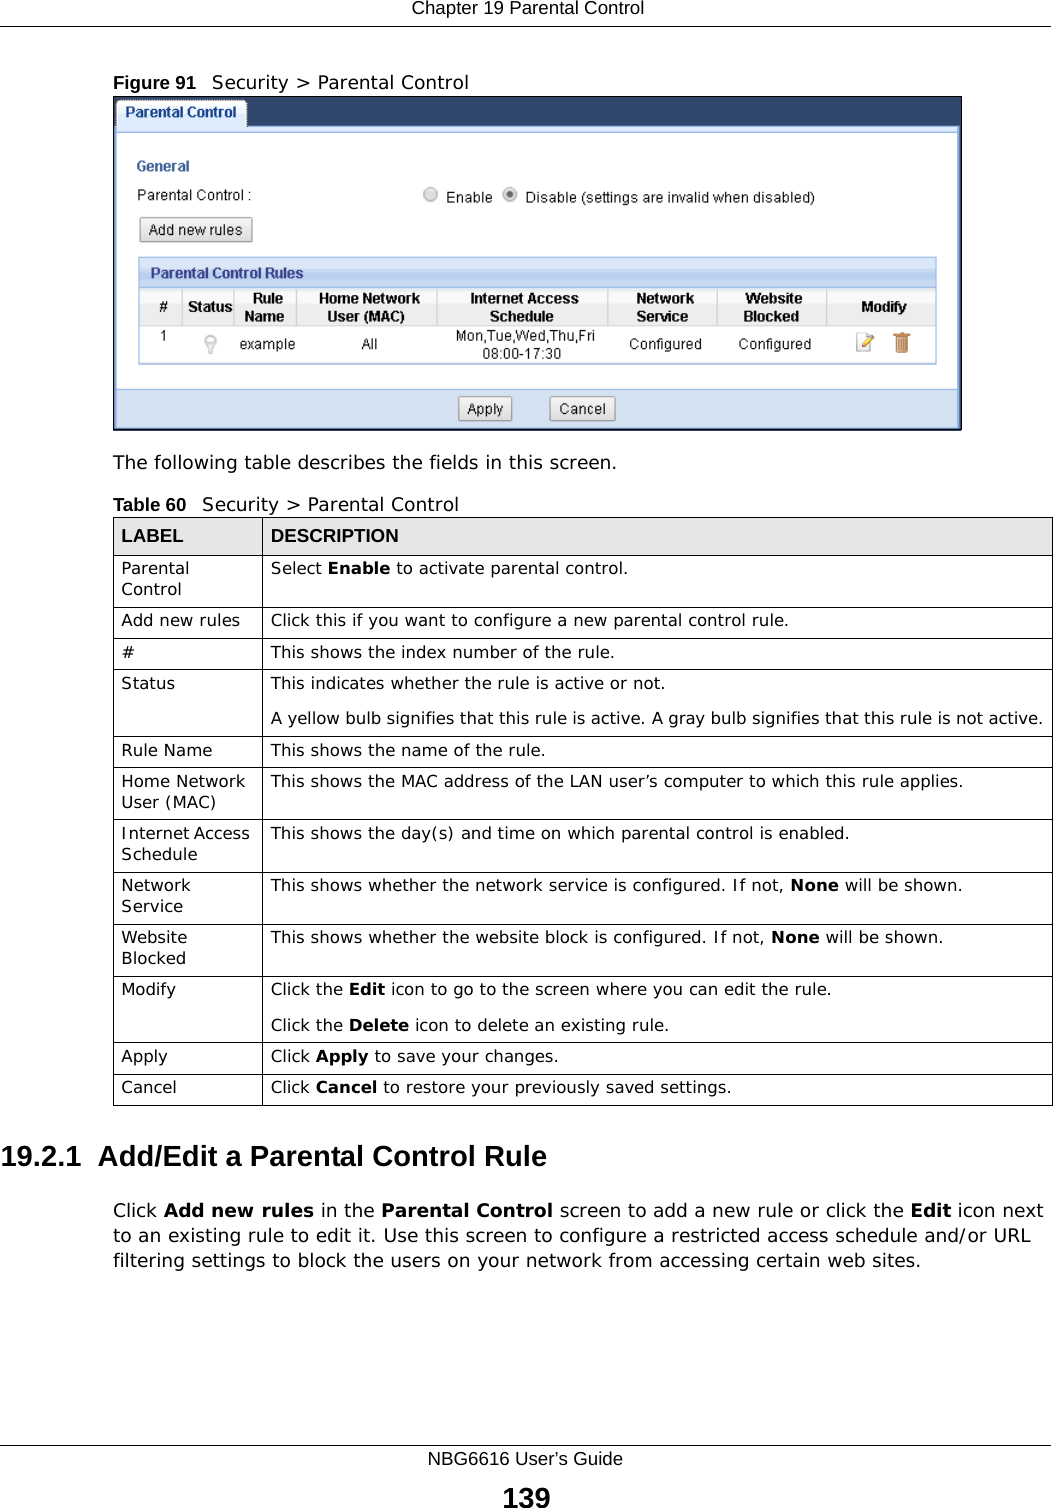  Chapter 19 Parental ControlNBG6616 User’s Guide139Figure 91   Security &gt; Parental Control The following table describes the fields in this screen. 19.2.1  Add/Edit a Parental Control RuleClick Add new rules in the Parental Control screen to add a new rule or click the Edit icon next to an existing rule to edit it. Use this screen to configure a restricted access schedule and/or URL filtering settings to block the users on your network from accessing certain web sites.Table 60   Security &gt; Parental ControlLABEL DESCRIPTIONParental Control Select Enable to activate parental control.Add new rules Click this if you want to configure a new parental control rule.#This shows the index number of the rule.Status This indicates whether the rule is active or not.A yellow bulb signifies that this rule is active. A gray bulb signifies that this rule is not active.Rule Name This shows the name of the rule.Home Network User (MAC) This shows the MAC address of the LAN user’s computer to which this rule applies.Internet Access Schedule This shows the day(s) and time on which parental control is enabled.Network Service This shows whether the network service is configured. If not, None will be shown.Website Blocked This shows whether the website block is configured. If not, None will be shown.Modify Click the Edit icon to go to the screen where you can edit the rule.Click the Delete icon to delete an existing rule.Apply Click Apply to save your changes.Cancel Click Cancel to restore your previously saved settings.